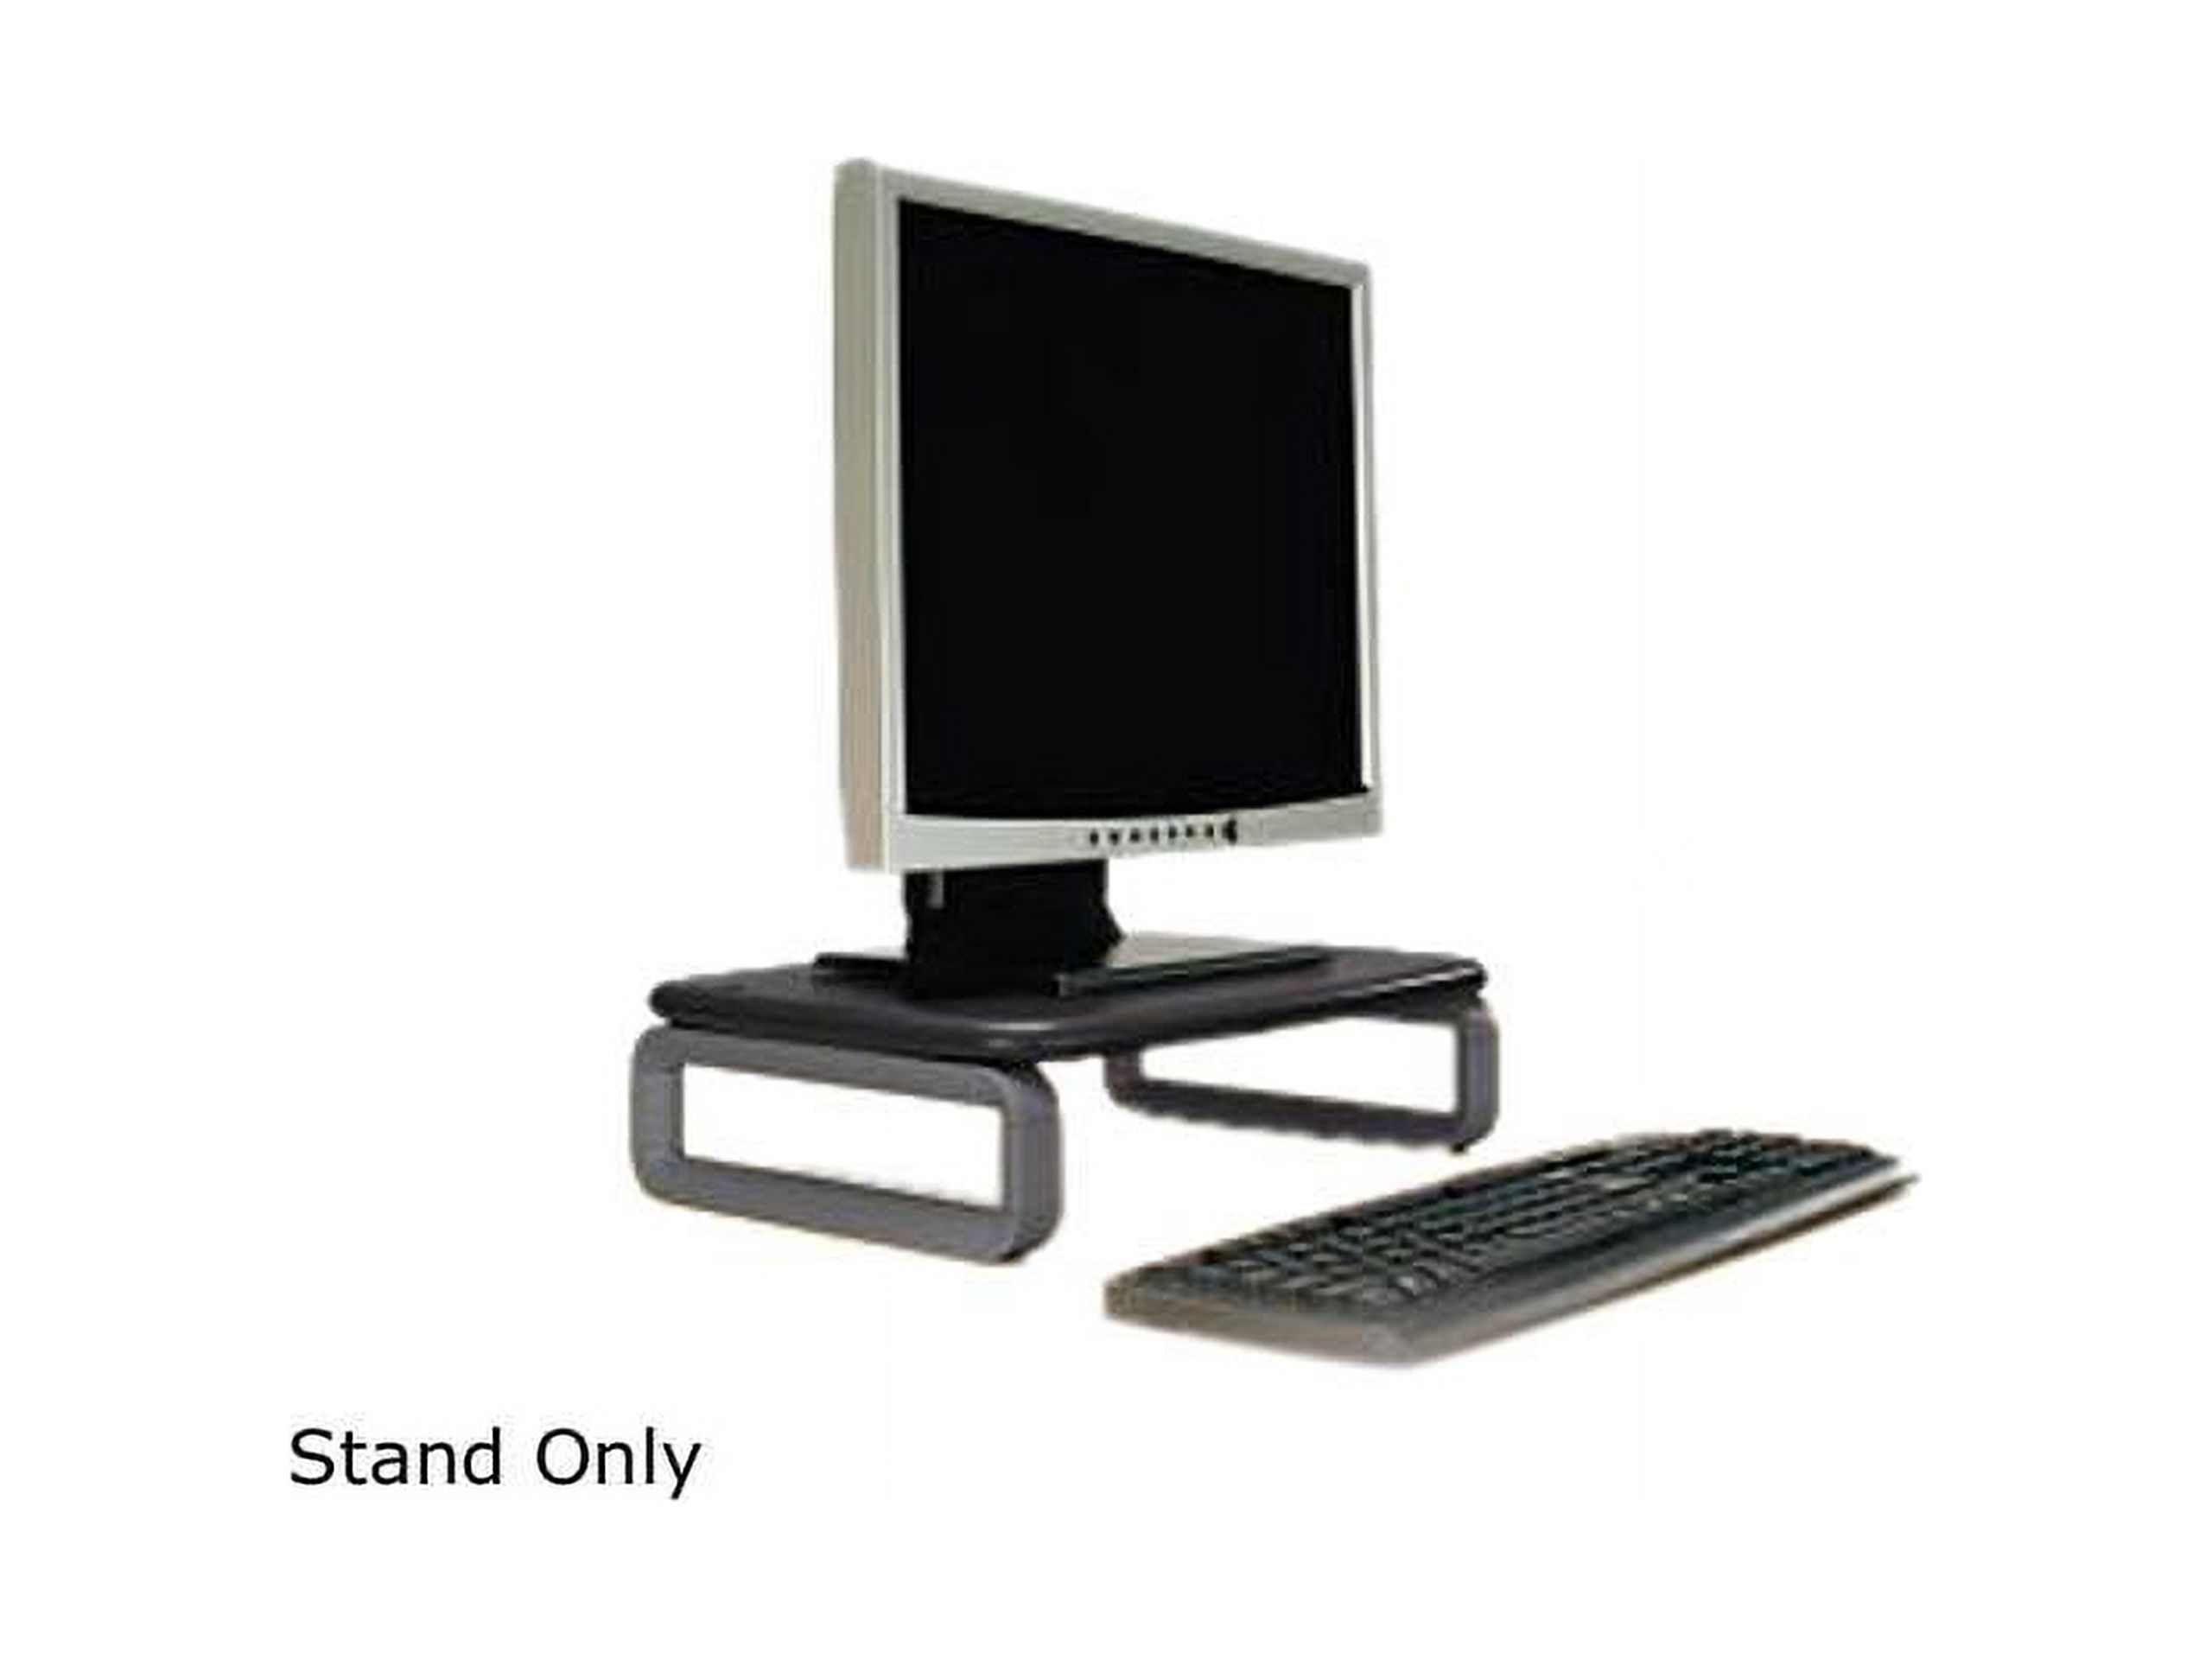 Kensington Monitor Stand Plus with SmartFit System, 16 x 11 5/8 x 6, Black/Gray - image 4 of 5